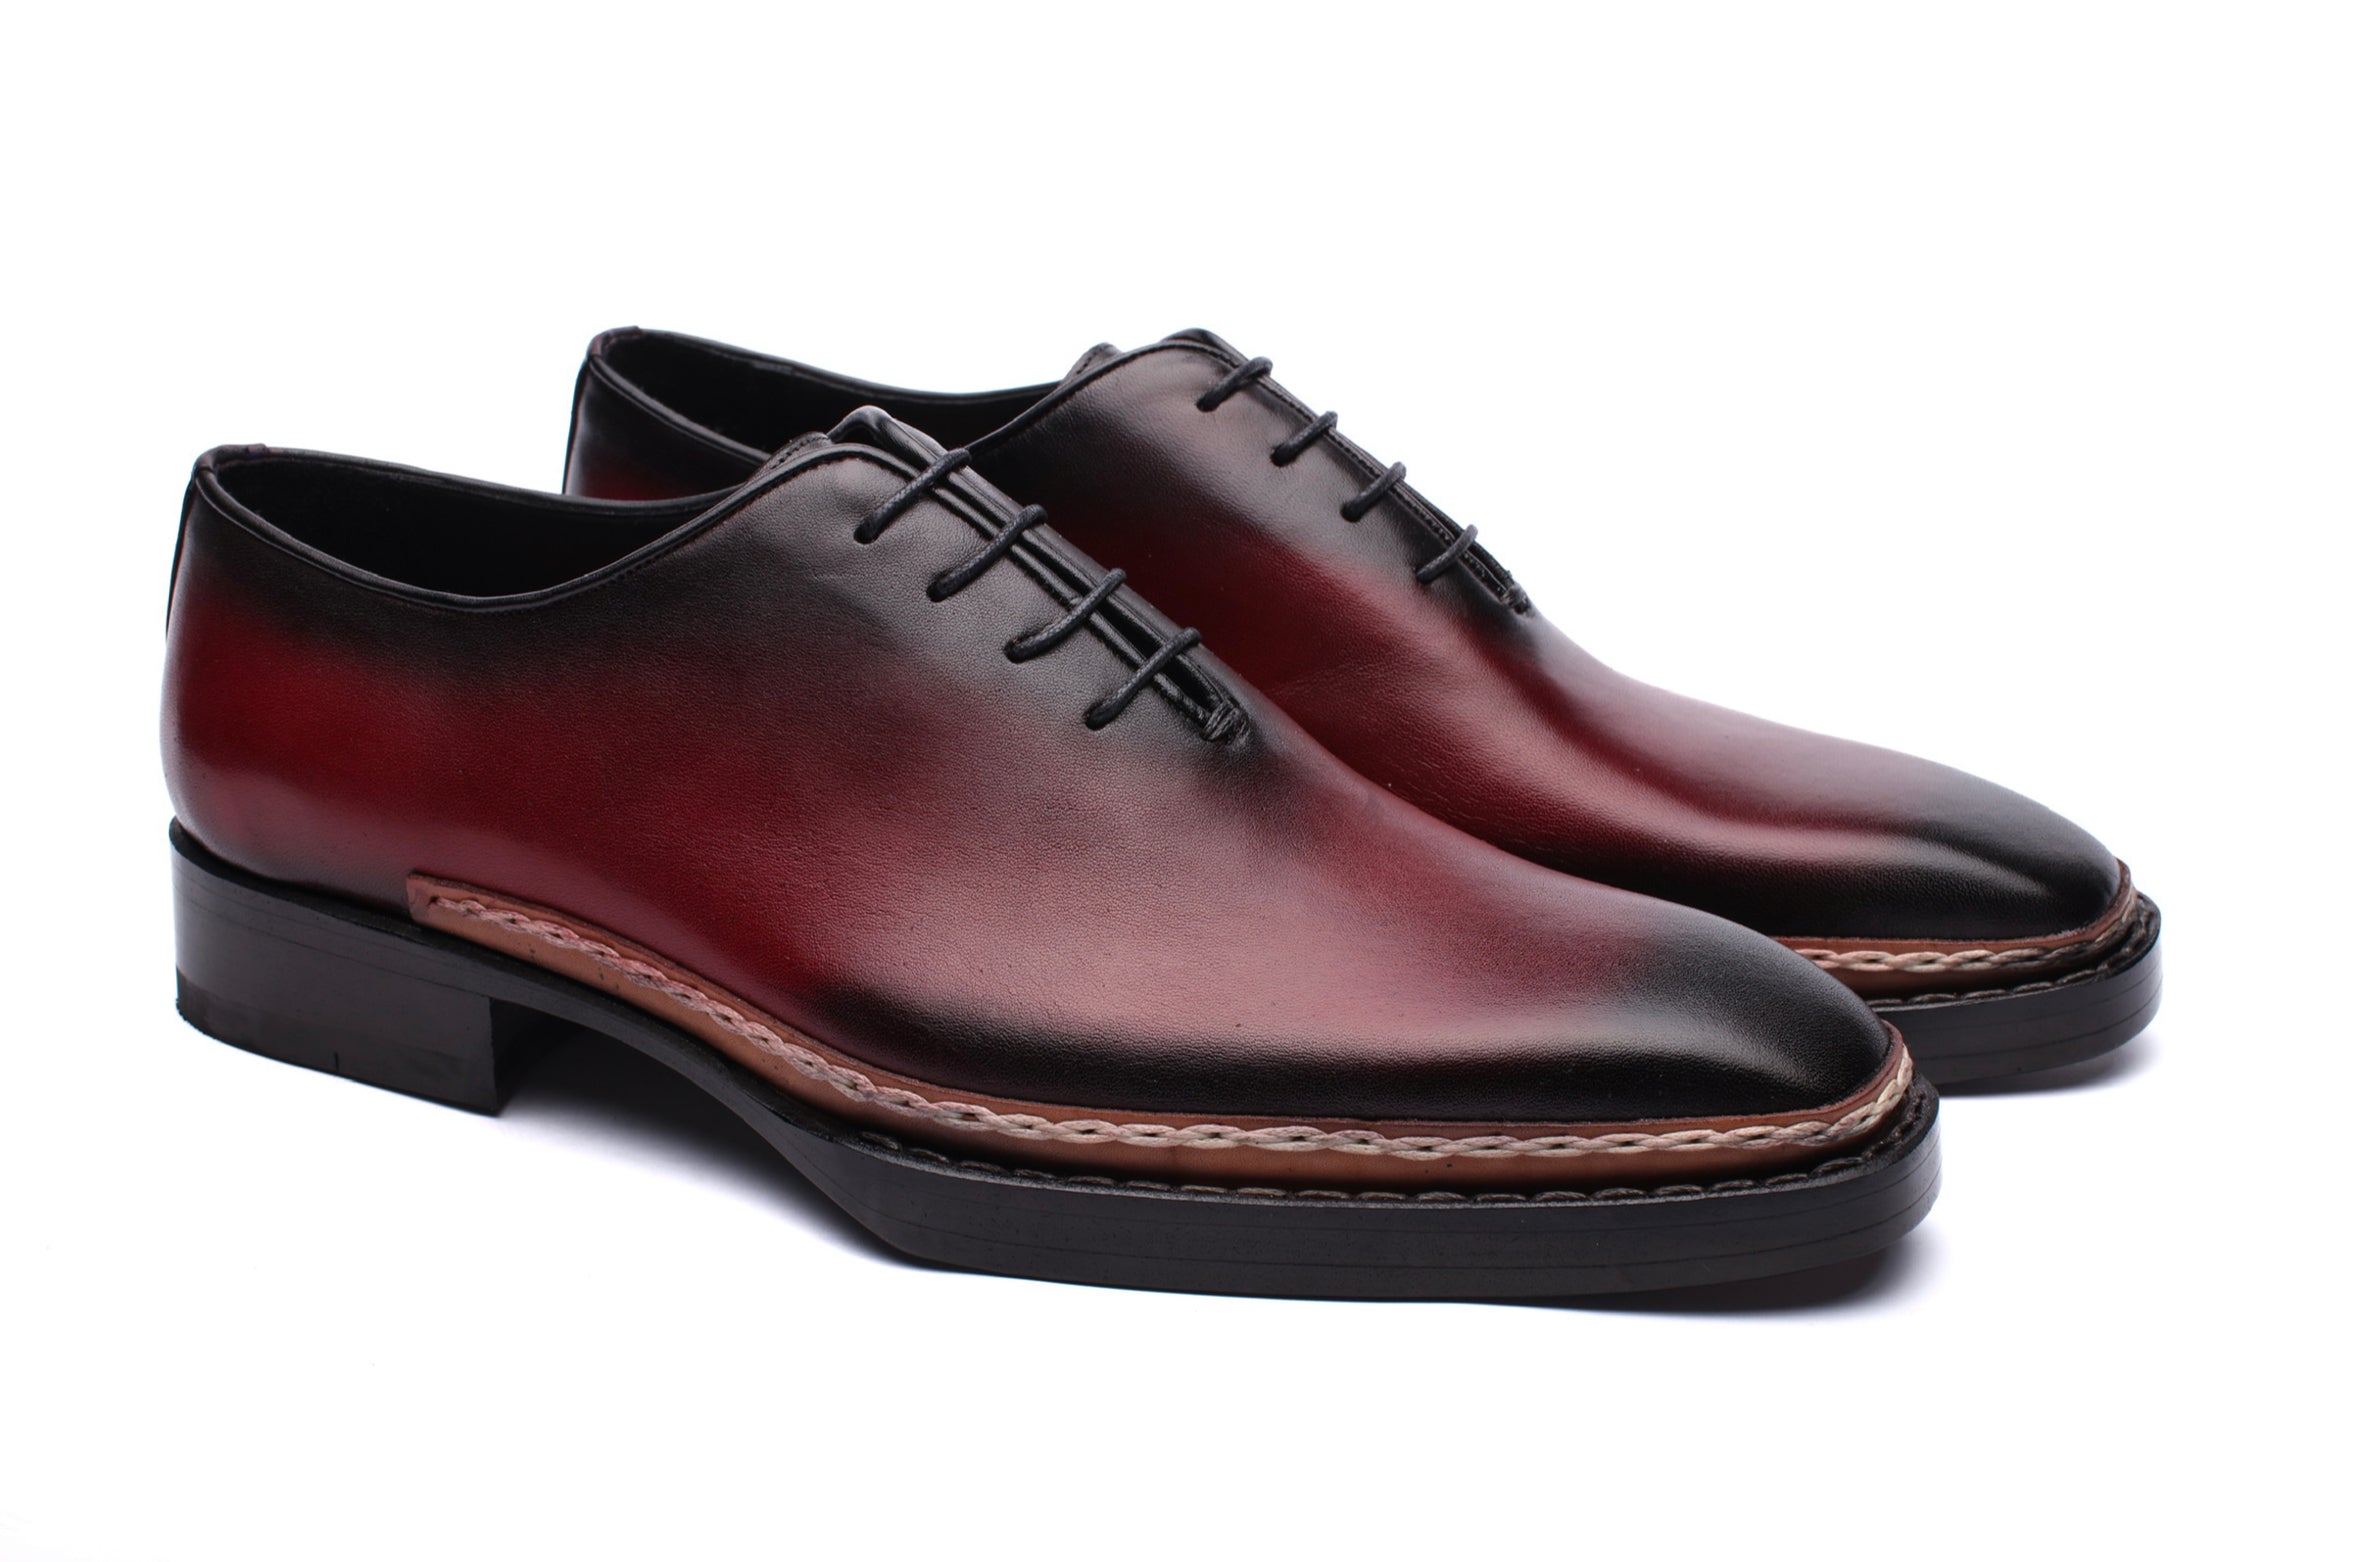 The Norwegian Welted Shoes - Brogues by Urbbana